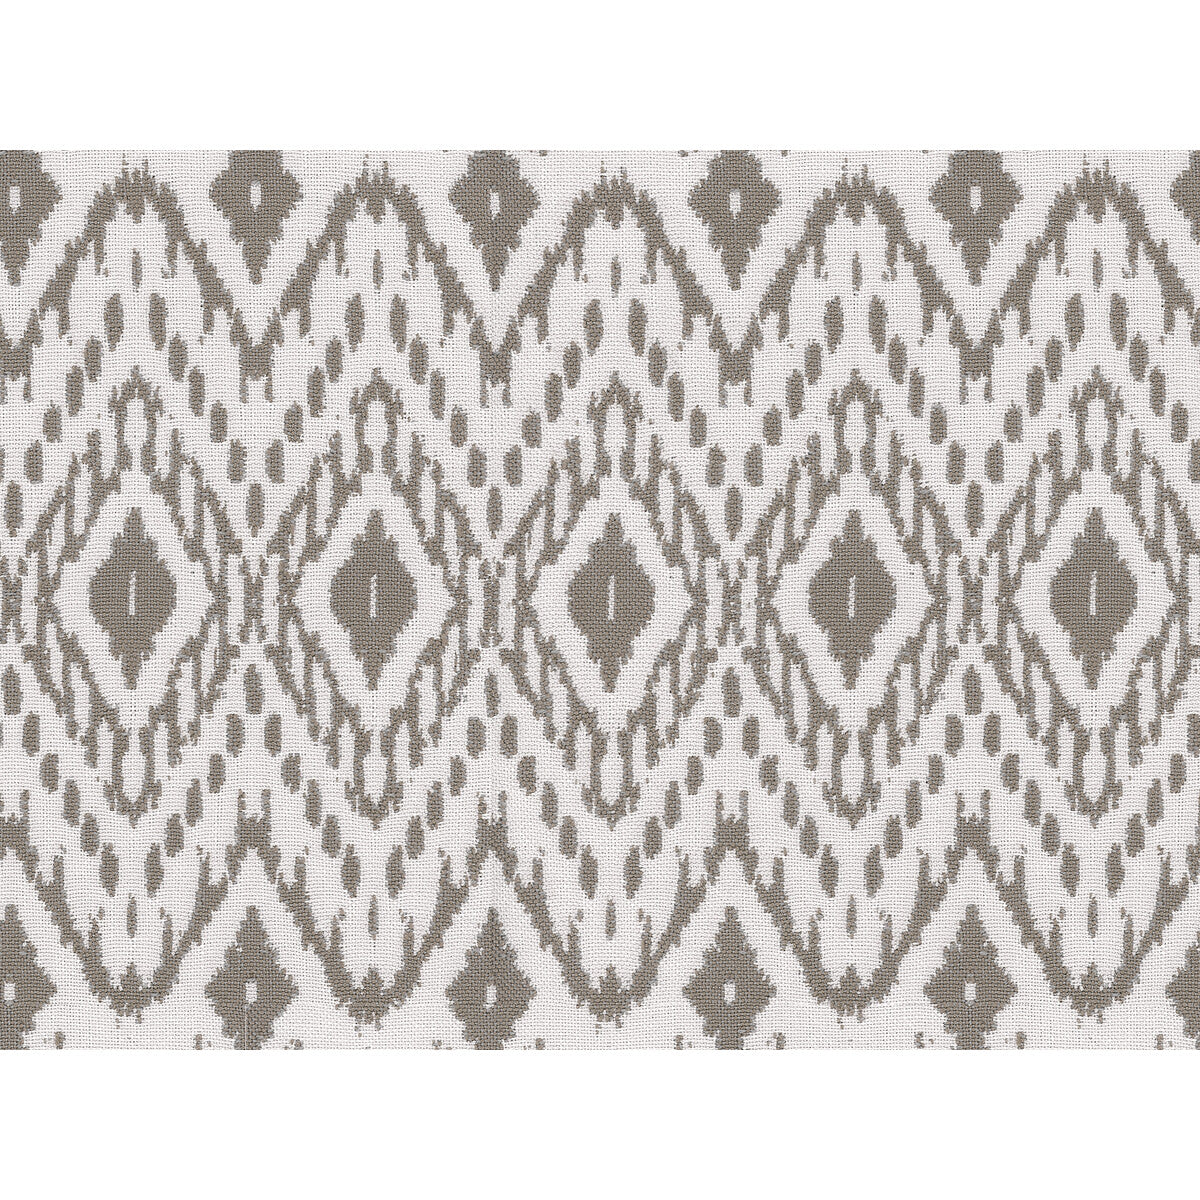 Scandikat fabric in chrome color - pattern 34536.11.0 - by Kravet Design in the Echo Indoor Outdoor Ibiza collection